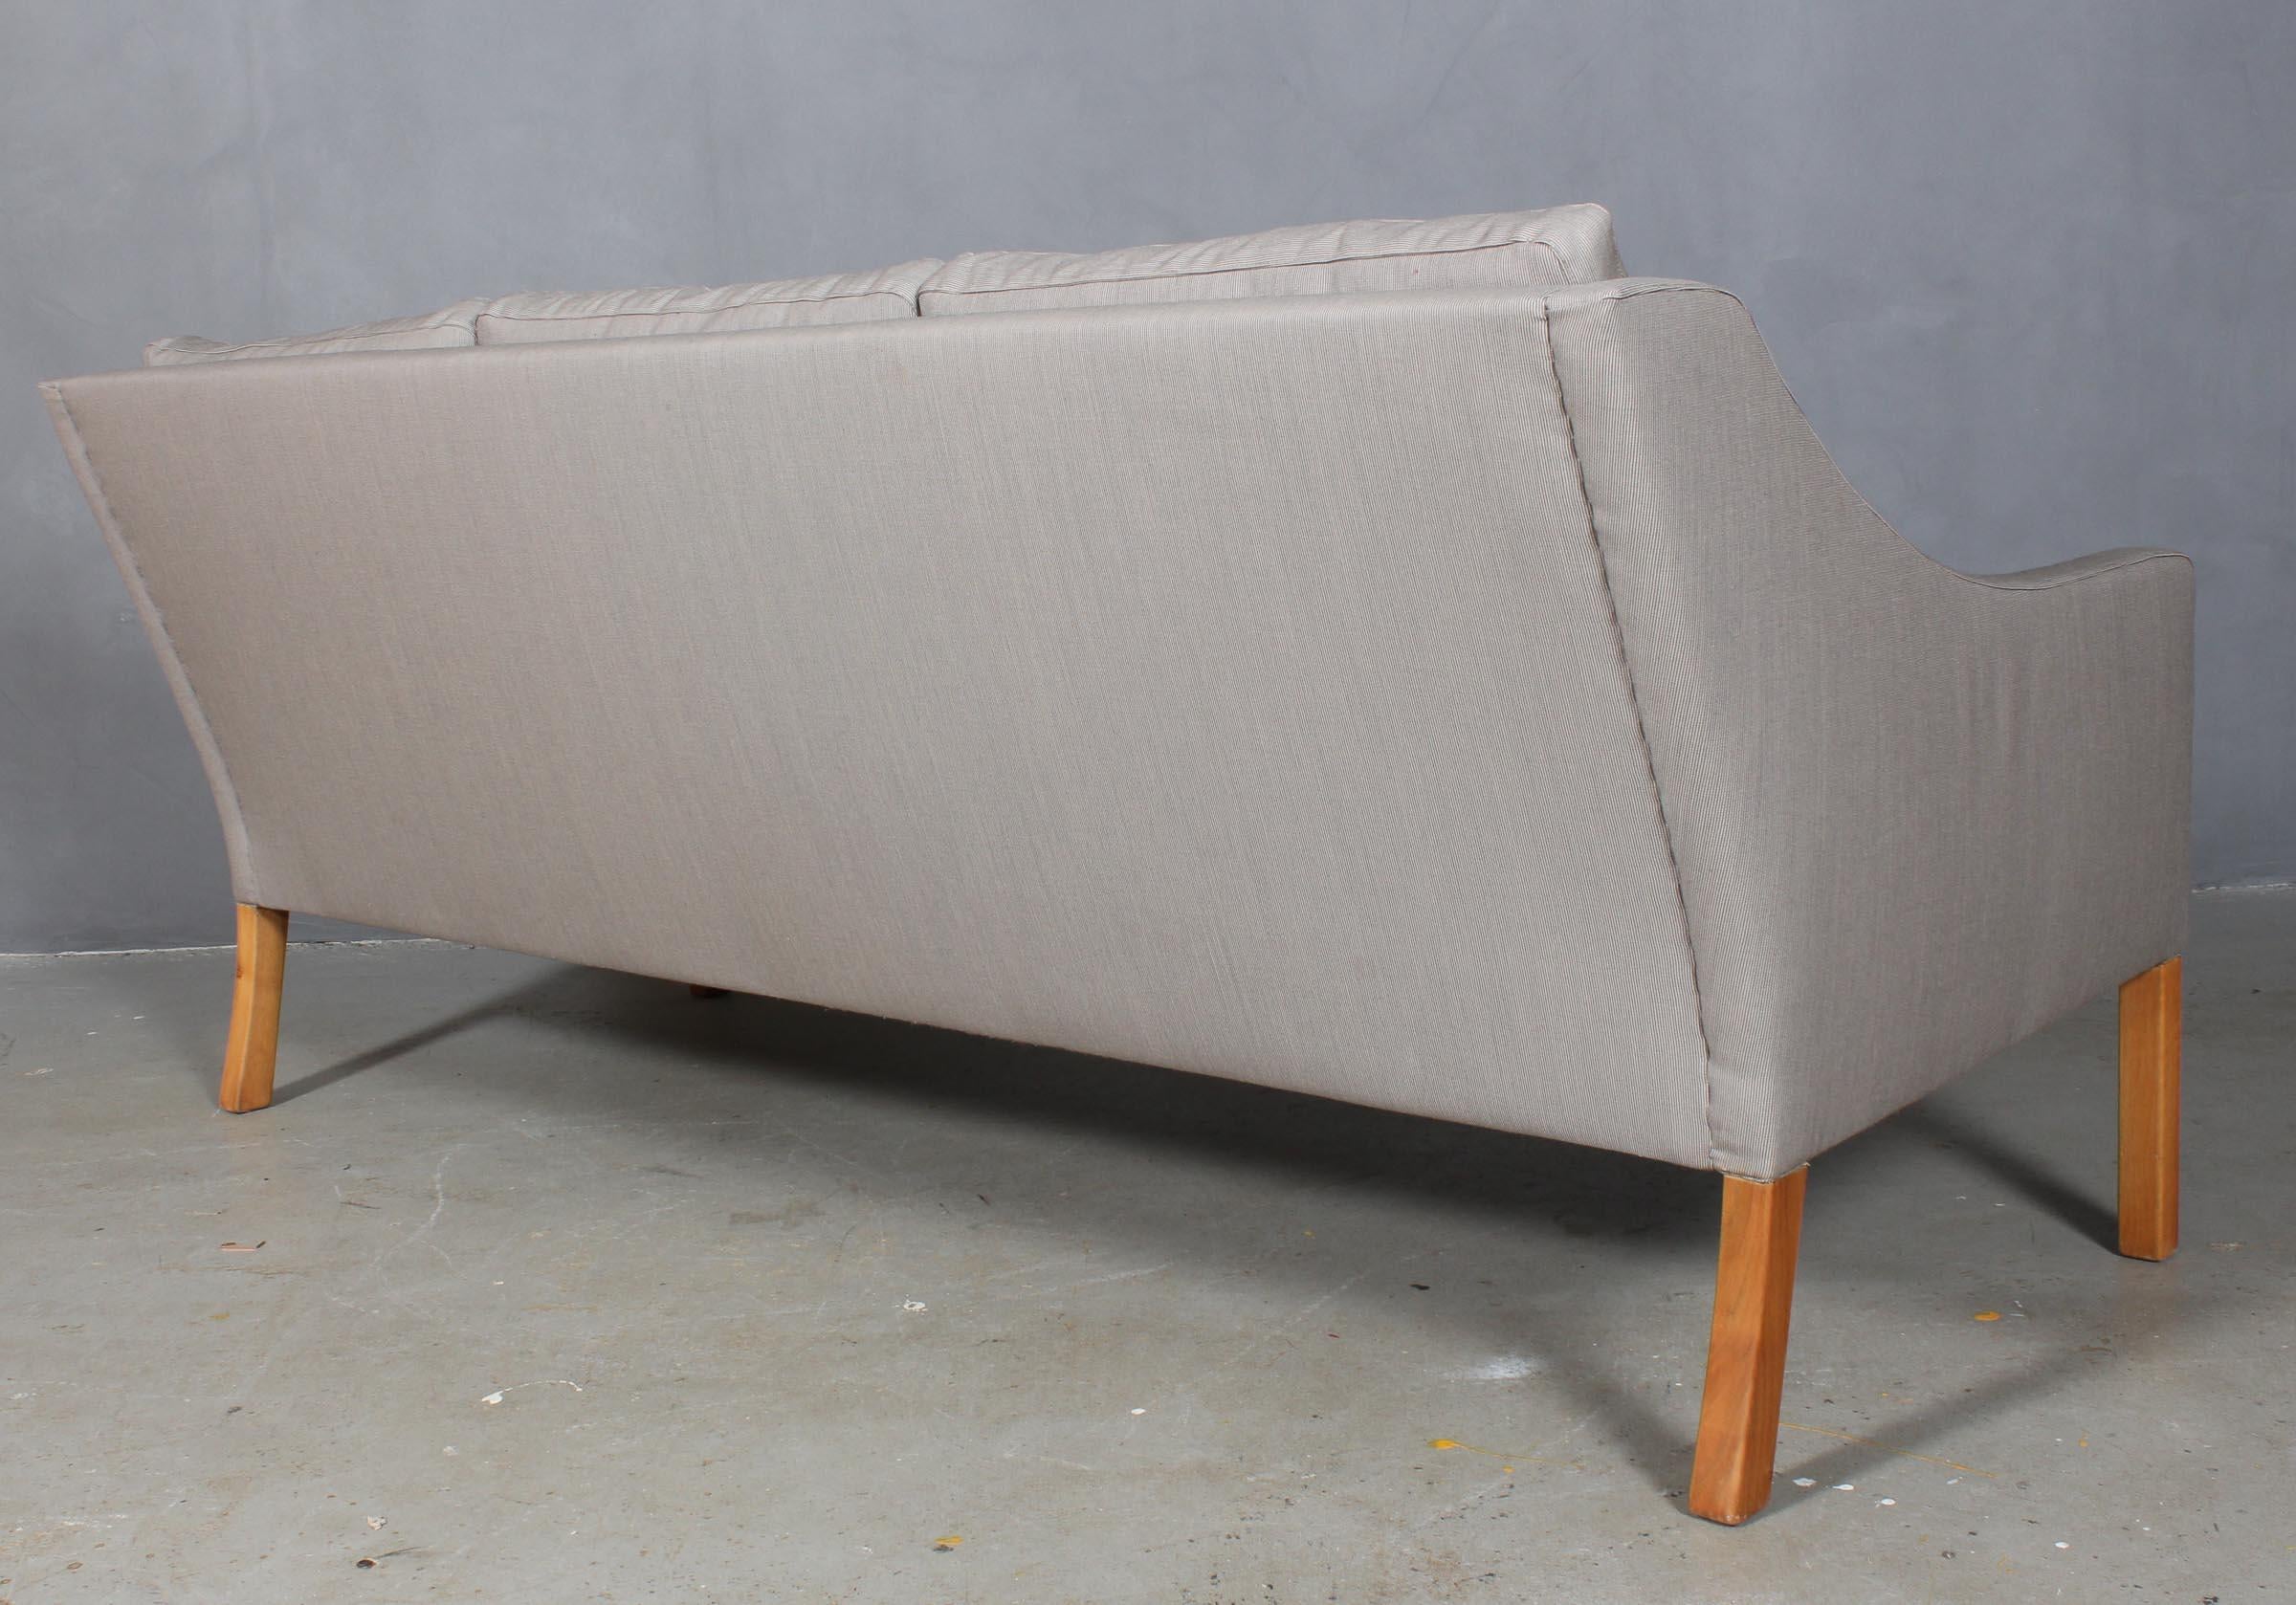 Børge Mogensen three-seat sofa upholstered With Fuse fabric designed by Raf Simons made by Kvadrat.

Legs of mahogany.

Model 2209, made by Fredericia Furniture.